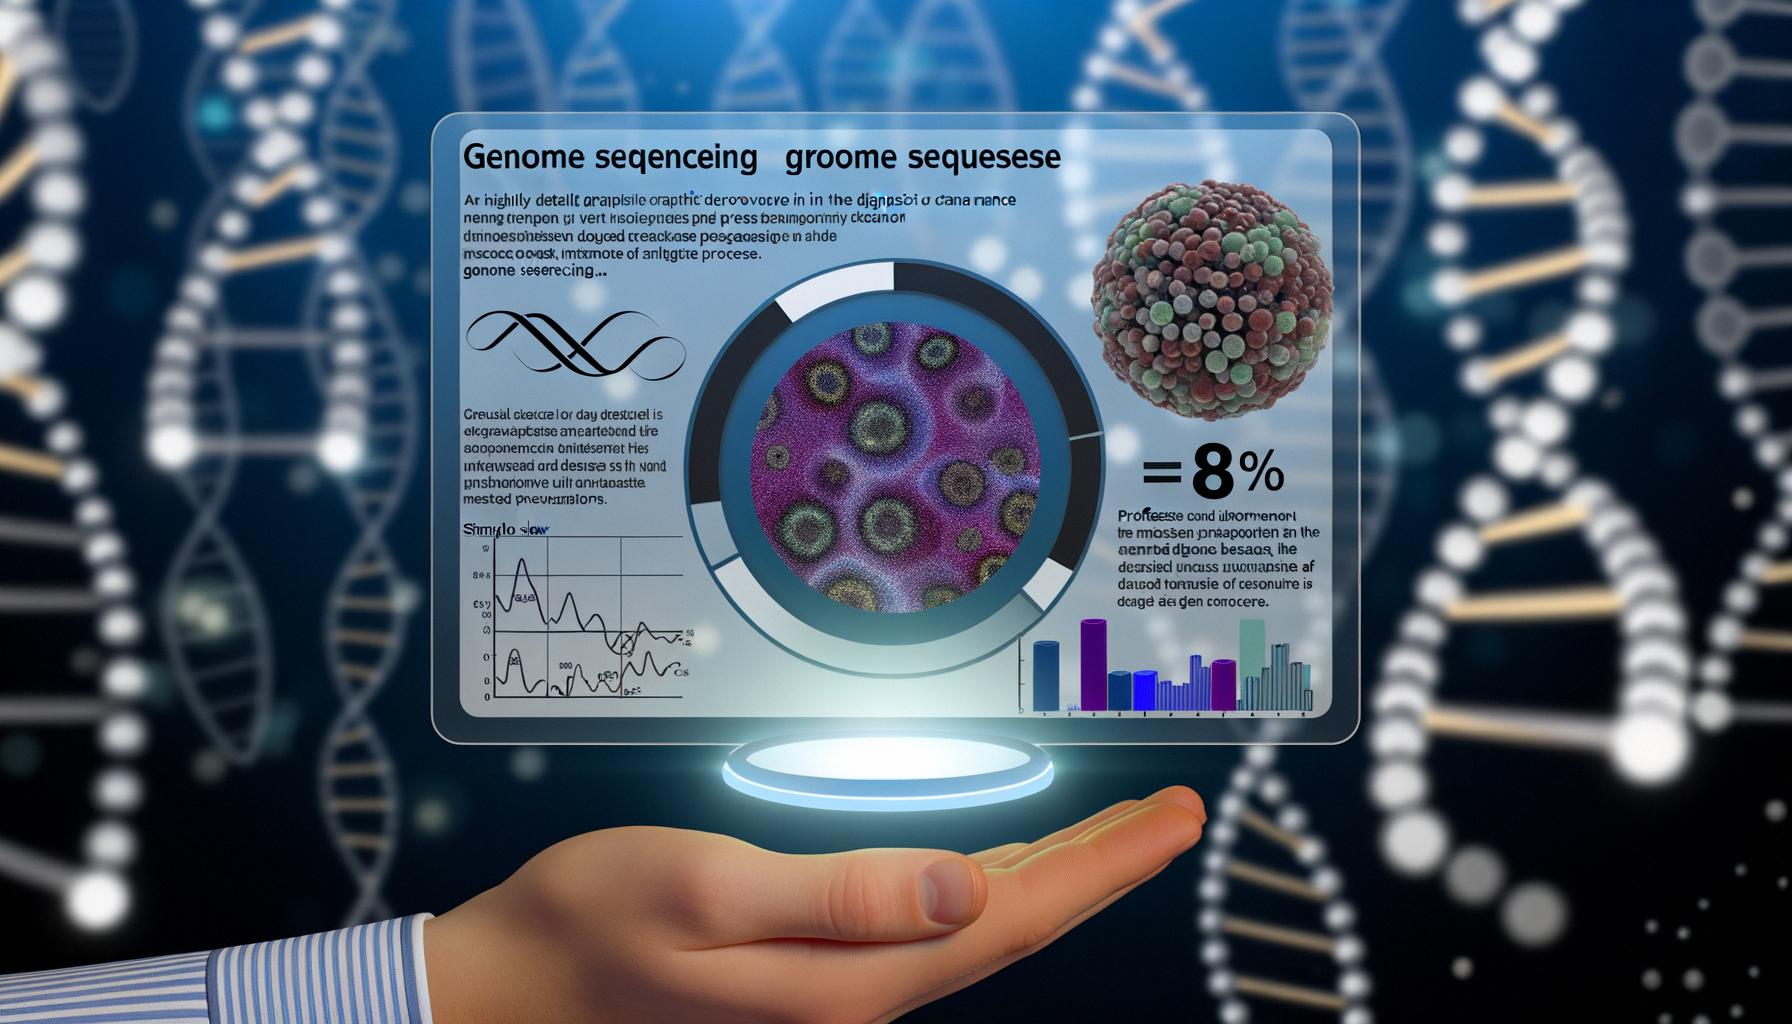 Genome sequencing improves rare disease diagnoses by 8%